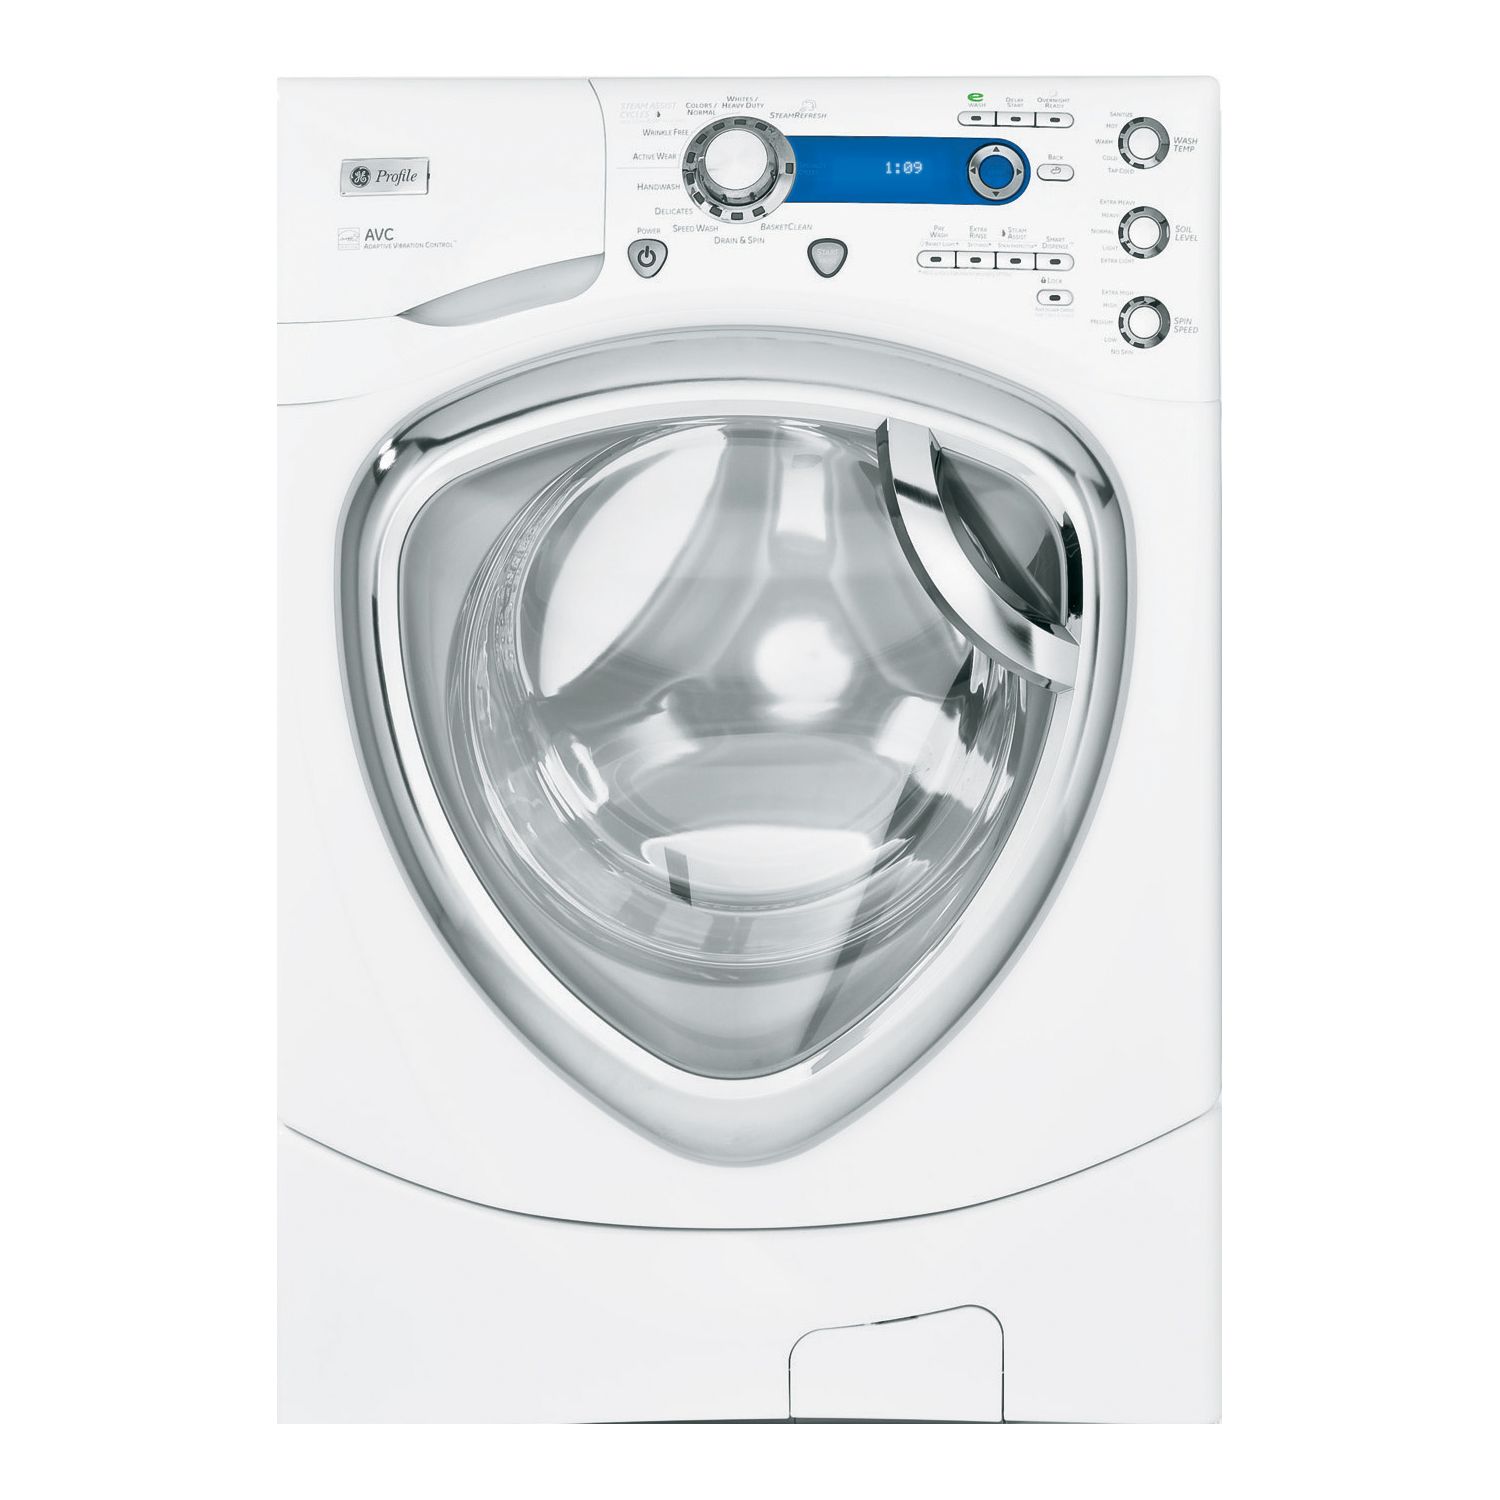 GE Profile Series 4.3 cu. ft. Steam Front-Load Washer - White